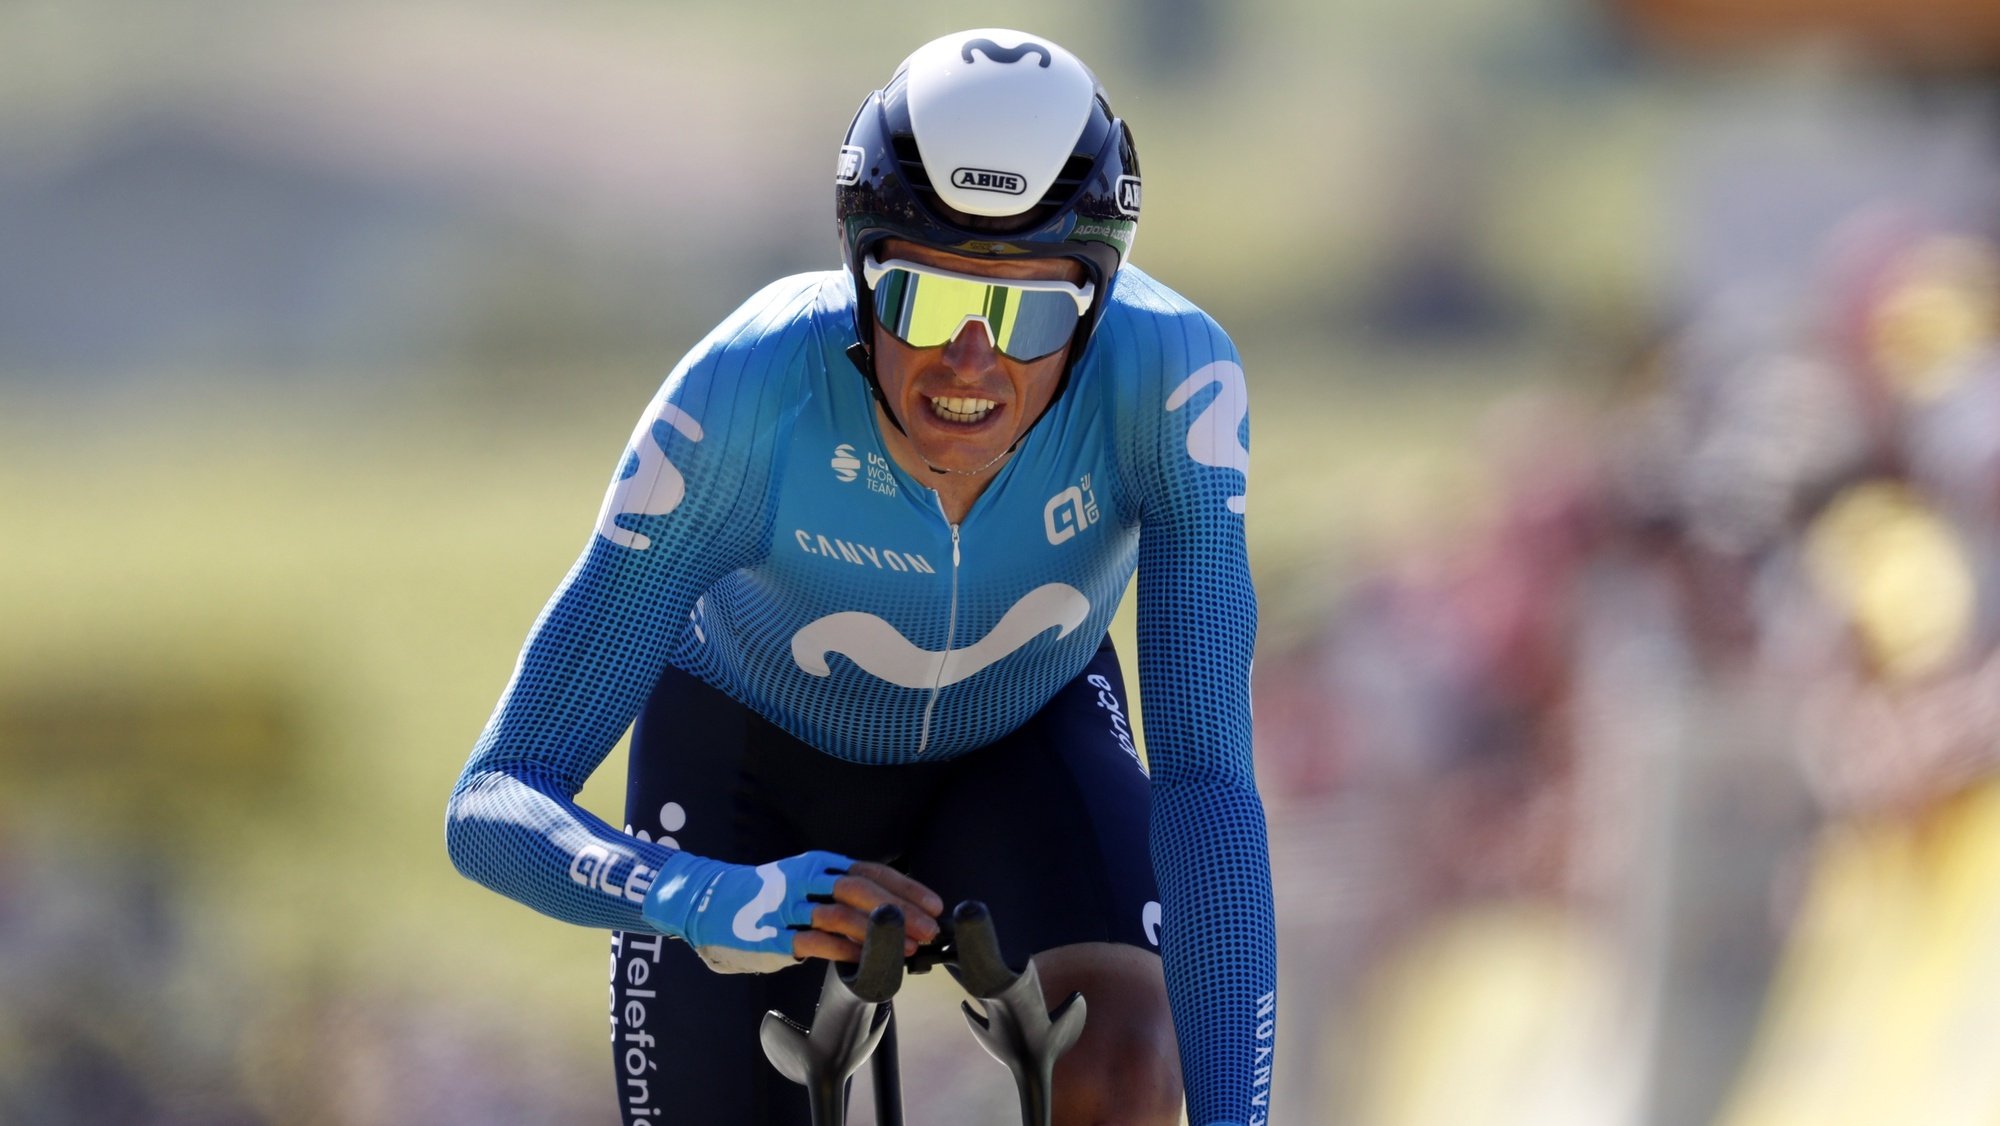 epa09350428 Spanish rider Enric Mas of the Movistar Team reacts as he crosses the finish line during the 20th stage of the Tour de France 2021, a time trial over 30.8 km from Libourne to Saint Emilion, France, 17 July 2021.  EPA/GUILLAUME HORCAJUELO